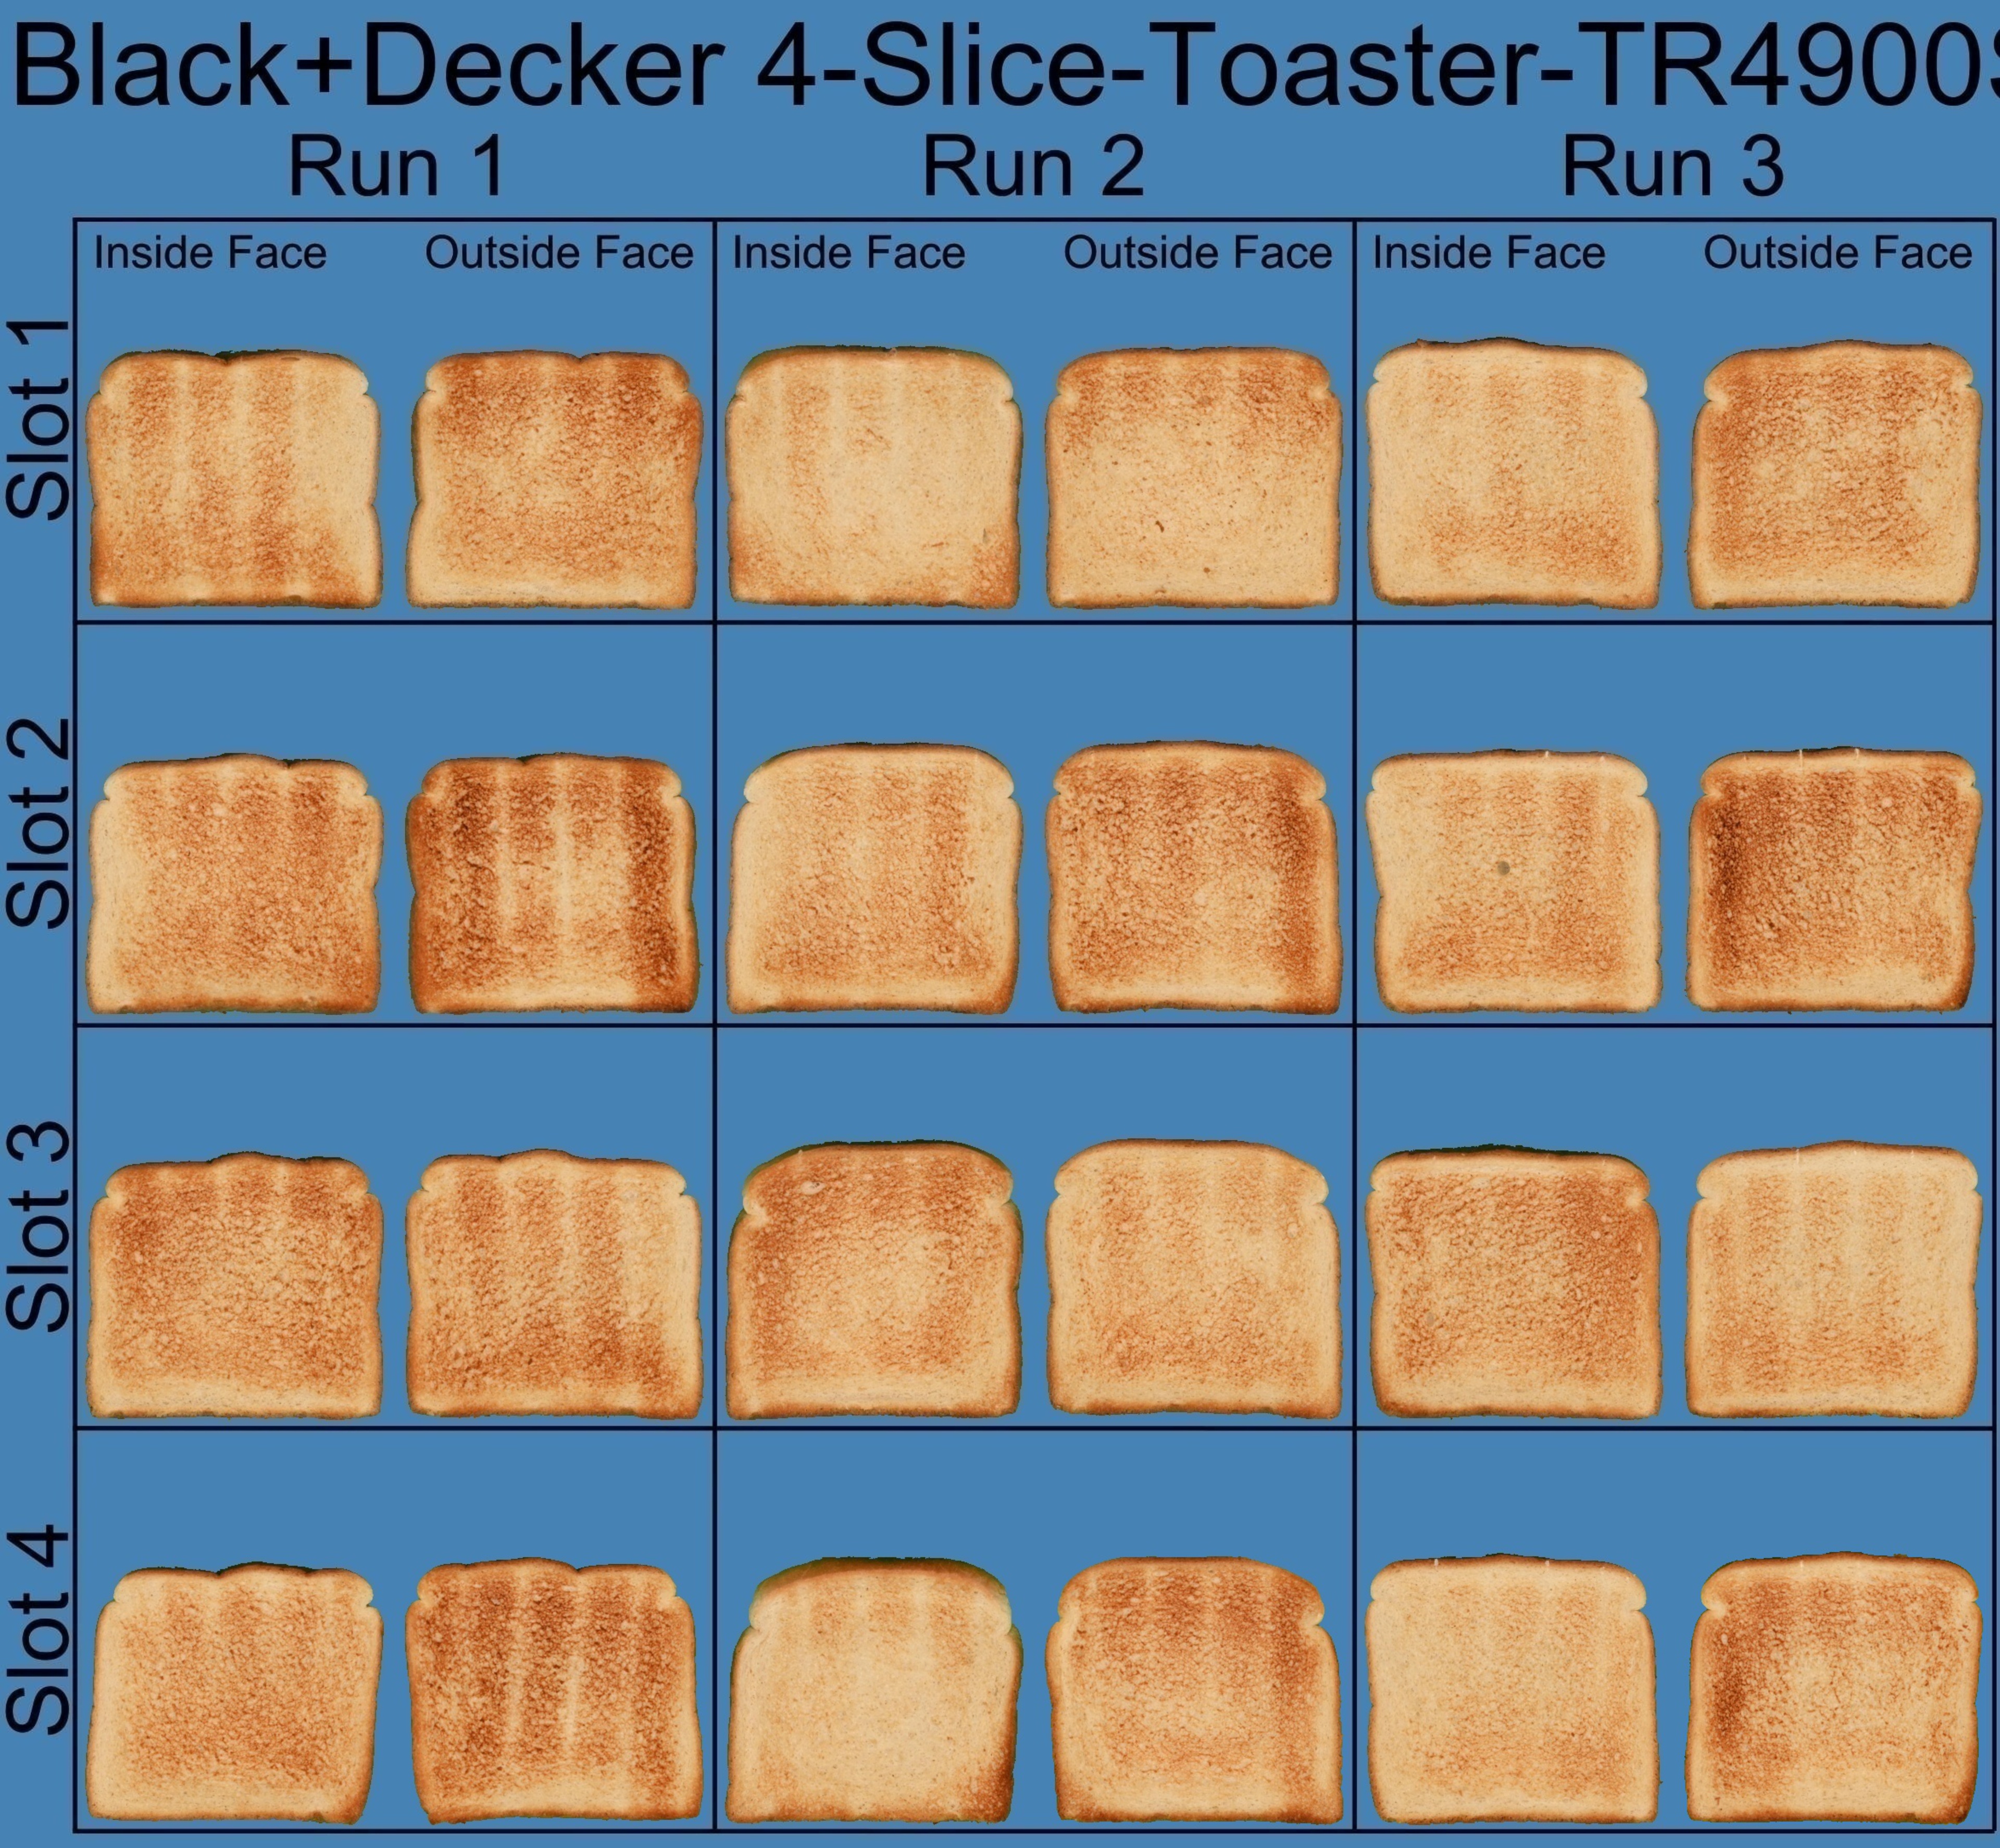 https://www.rtings.com/assets/products/8Pi3deO2/black-decker-4-slice-toaster-tr4900ssd/full-repeated-montage-large.jpg